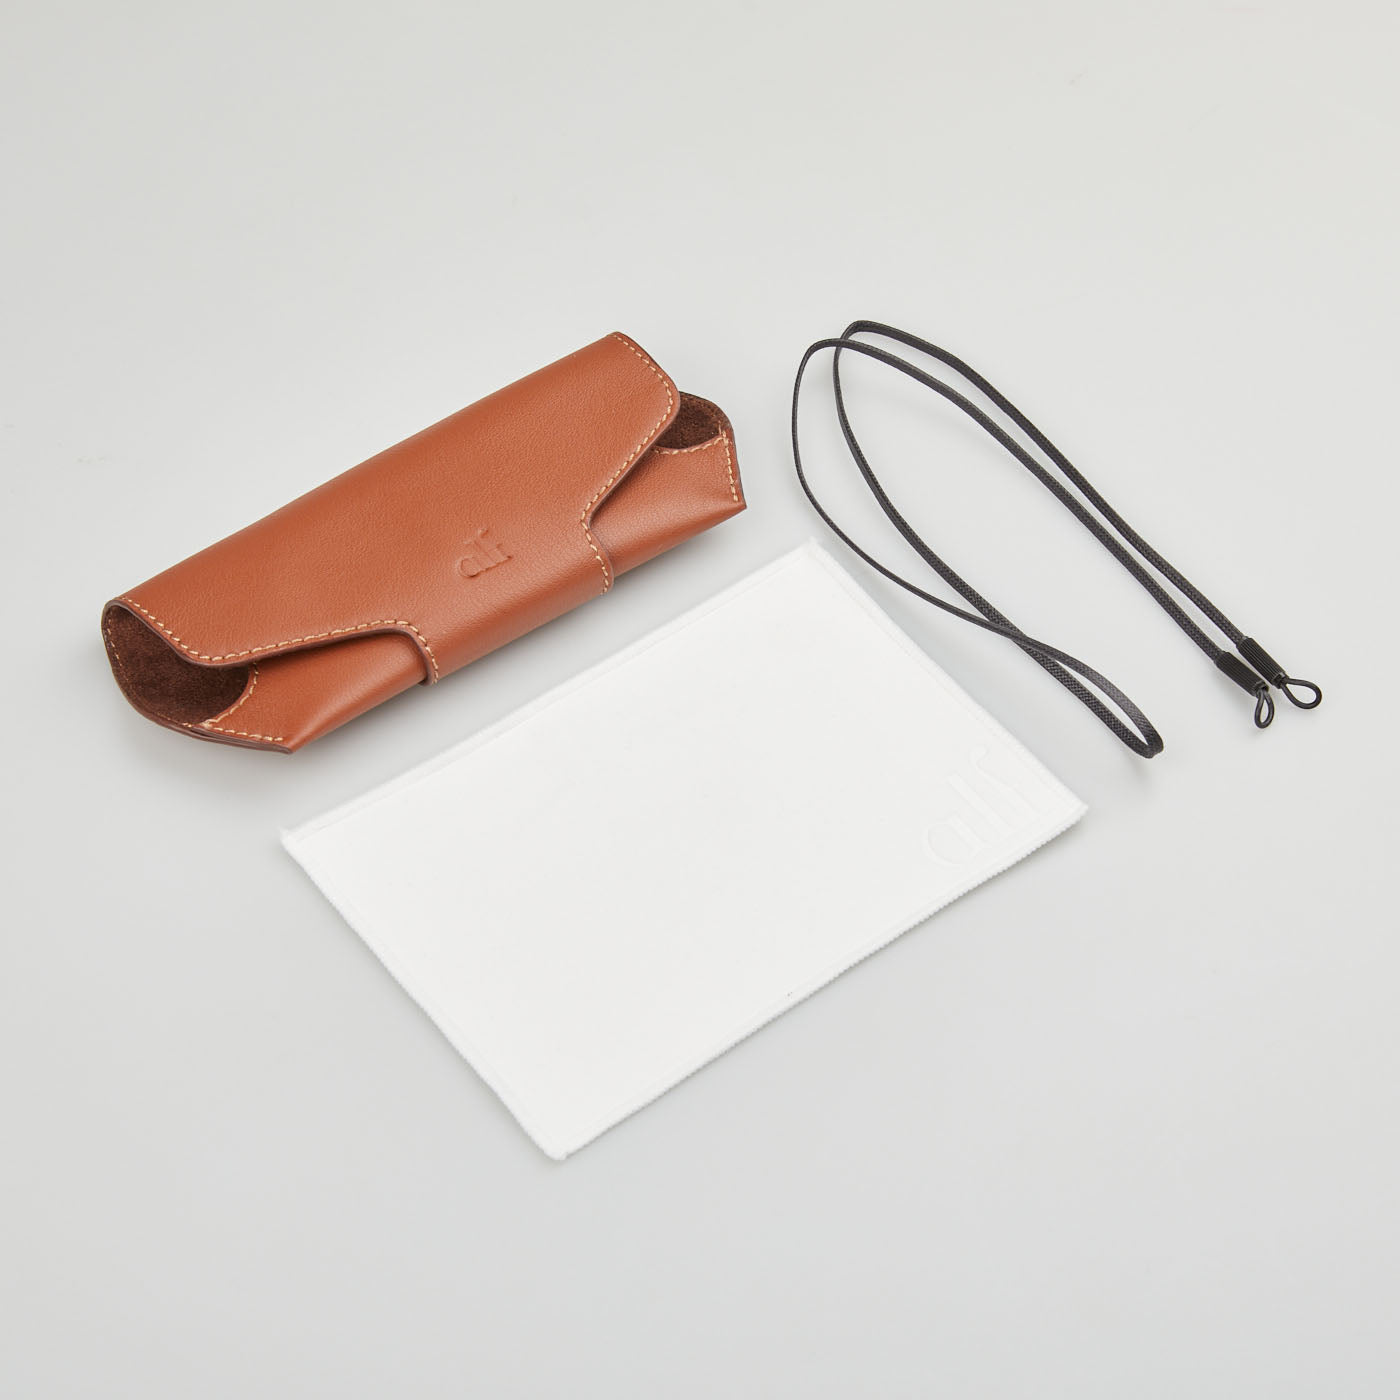 A Lunettes Alf brown leather case holding a notepad and paper with Brown Tortoise A22.15.006 Sunglasses.